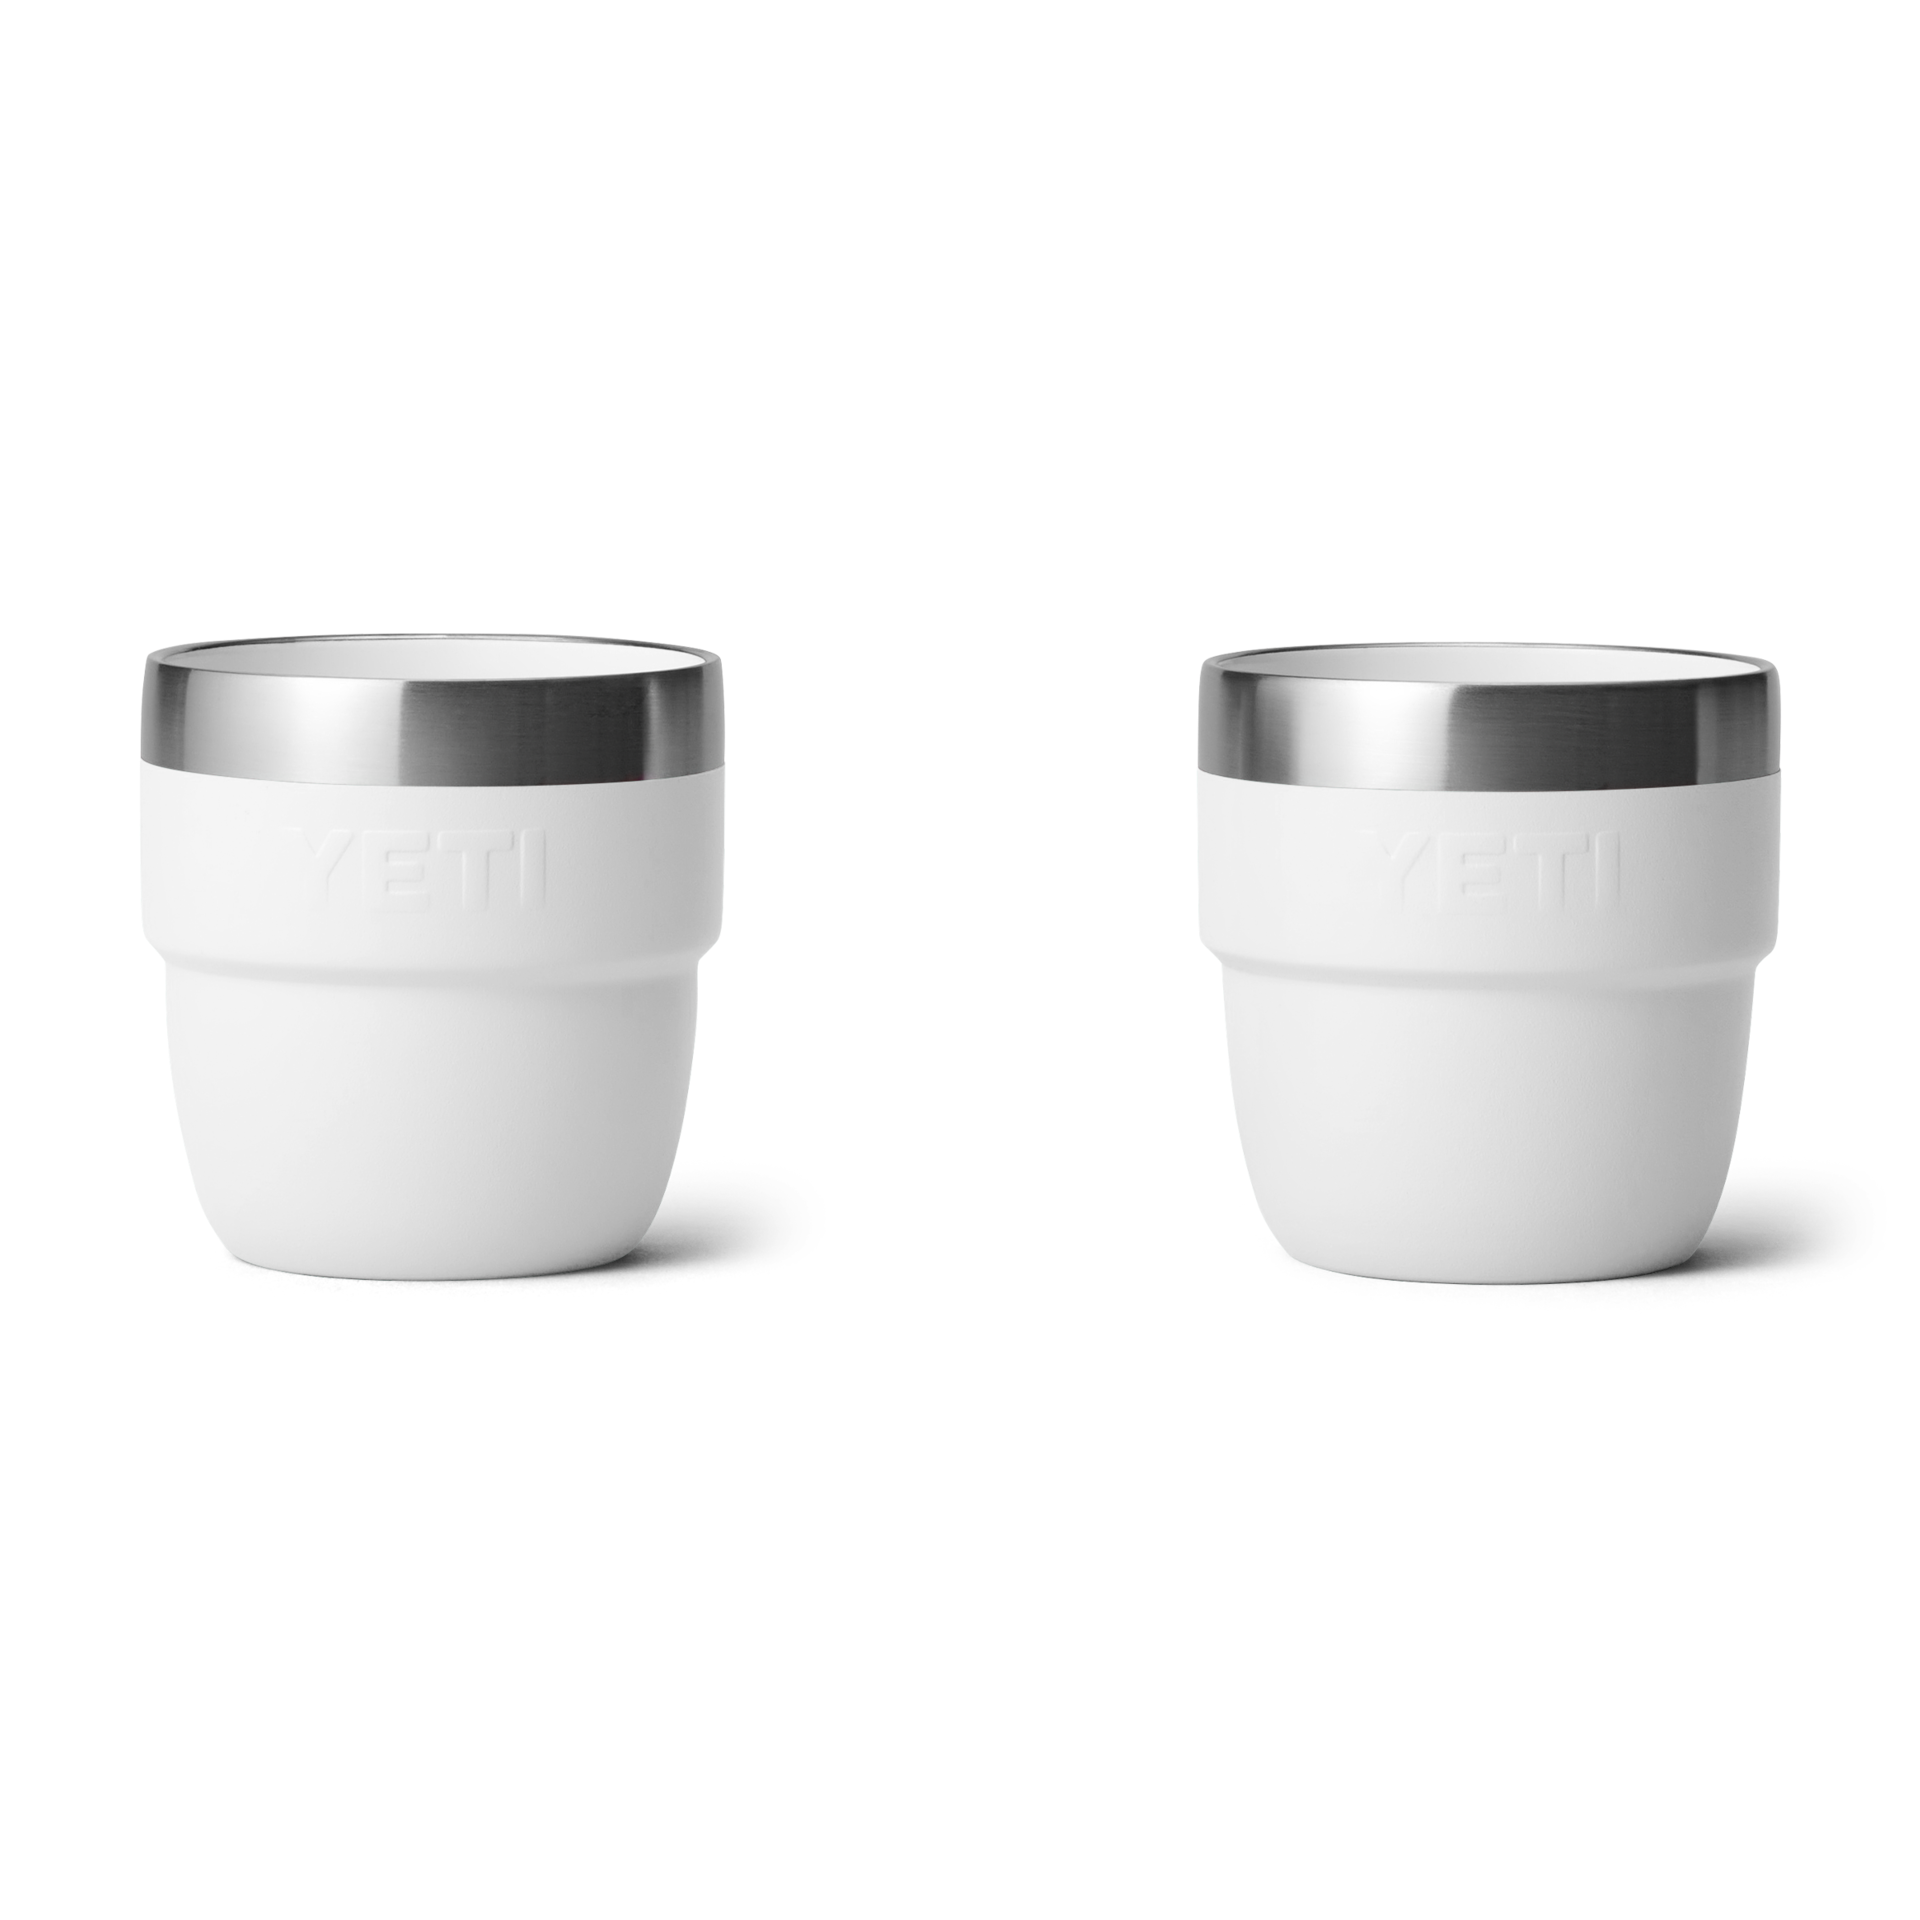 4 oz. / 118ml Stackable Cups- White (2 pack)